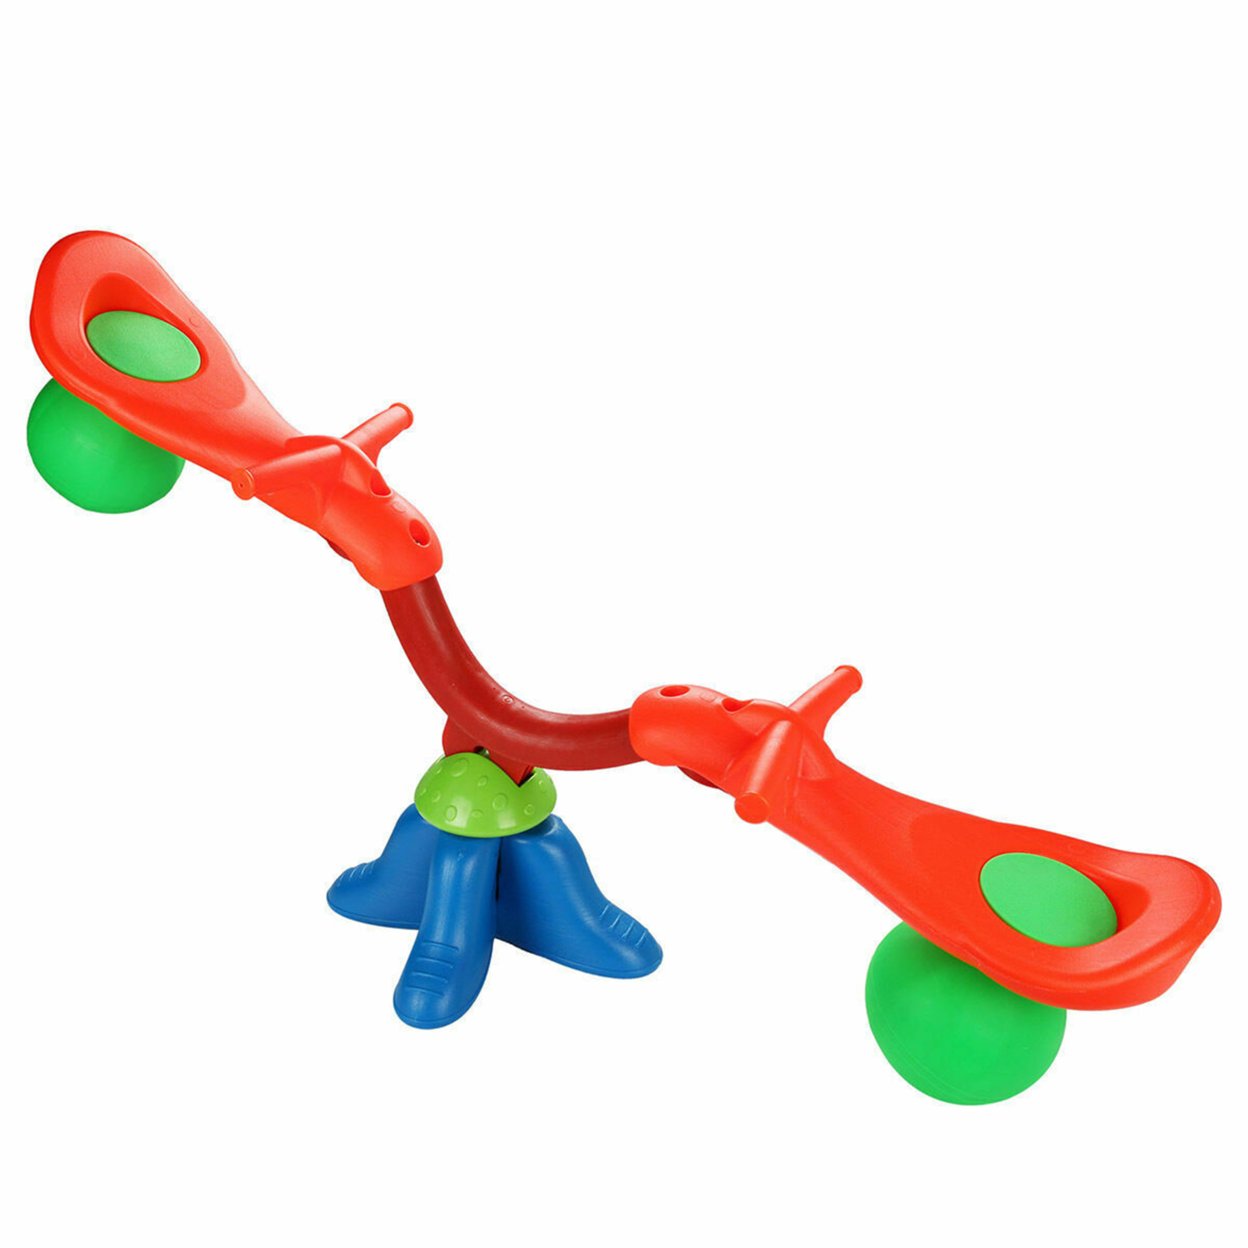 Kids Teeter Totter Seesaw Bouncer Children Toy W/ 360 Degrees Rotation